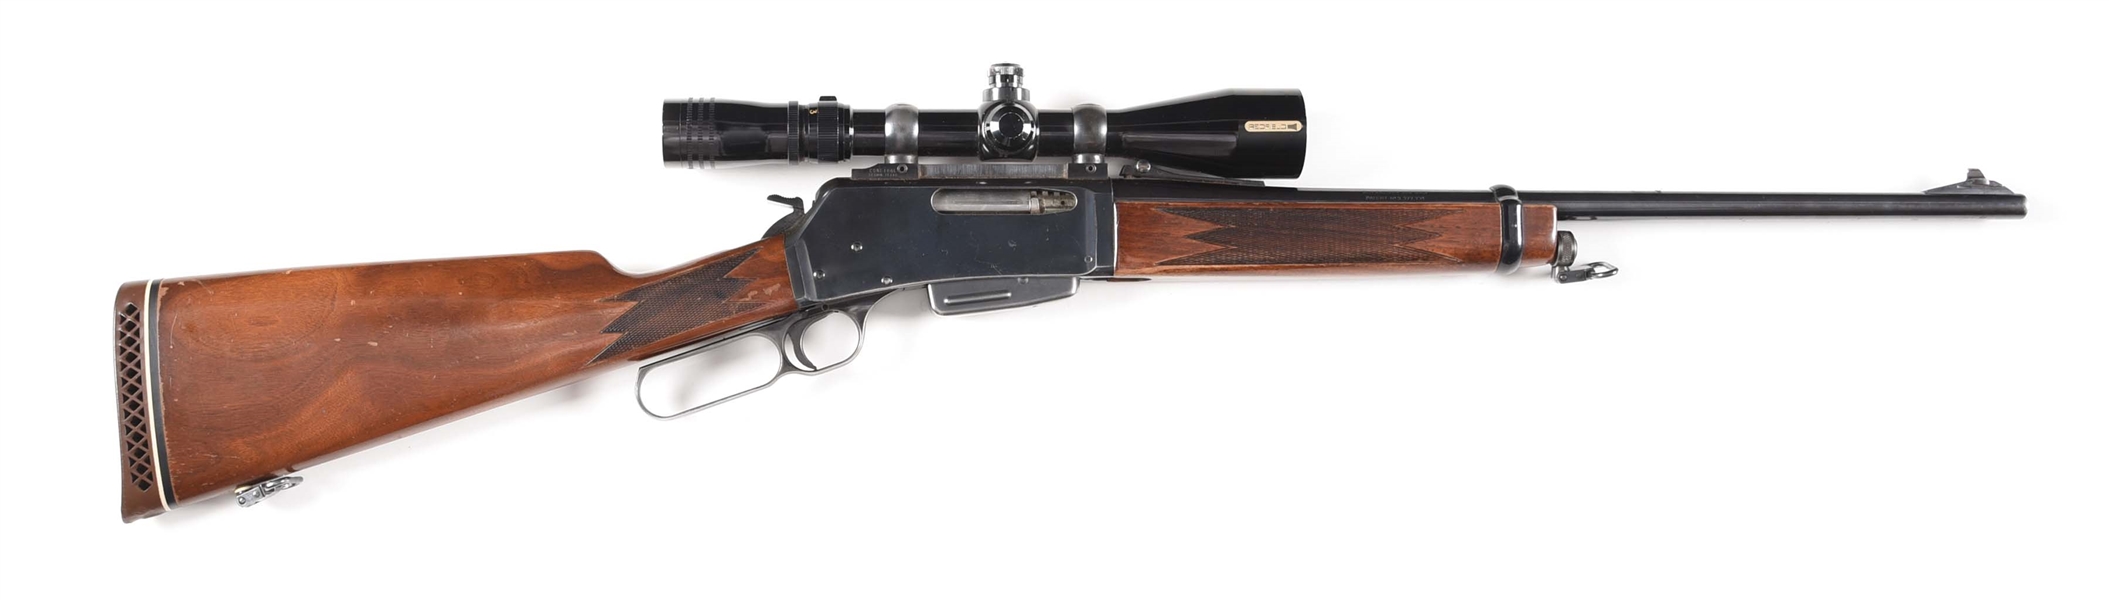 (M) BELGIAN BROWNING BLR .308 LEVER ACTION RIFLE WITH ORIGINAL BOX.